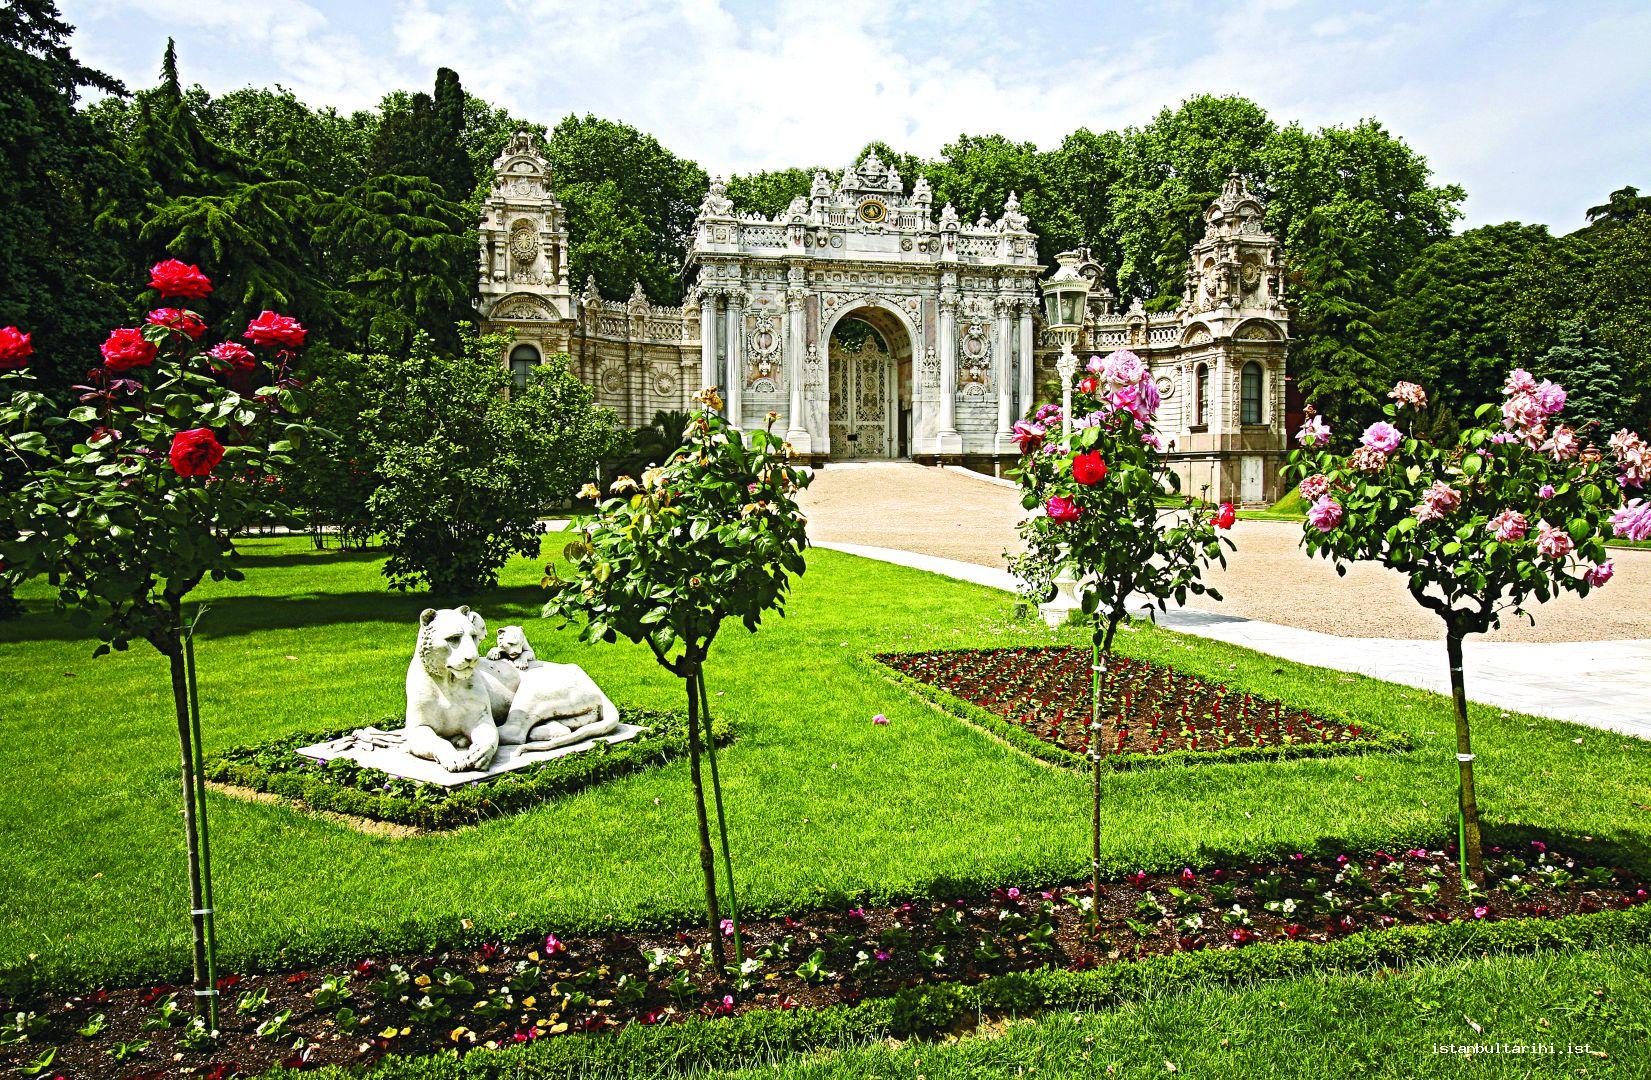 3- Sultanate gate of Dolmabahçe Palace (from the land side)    